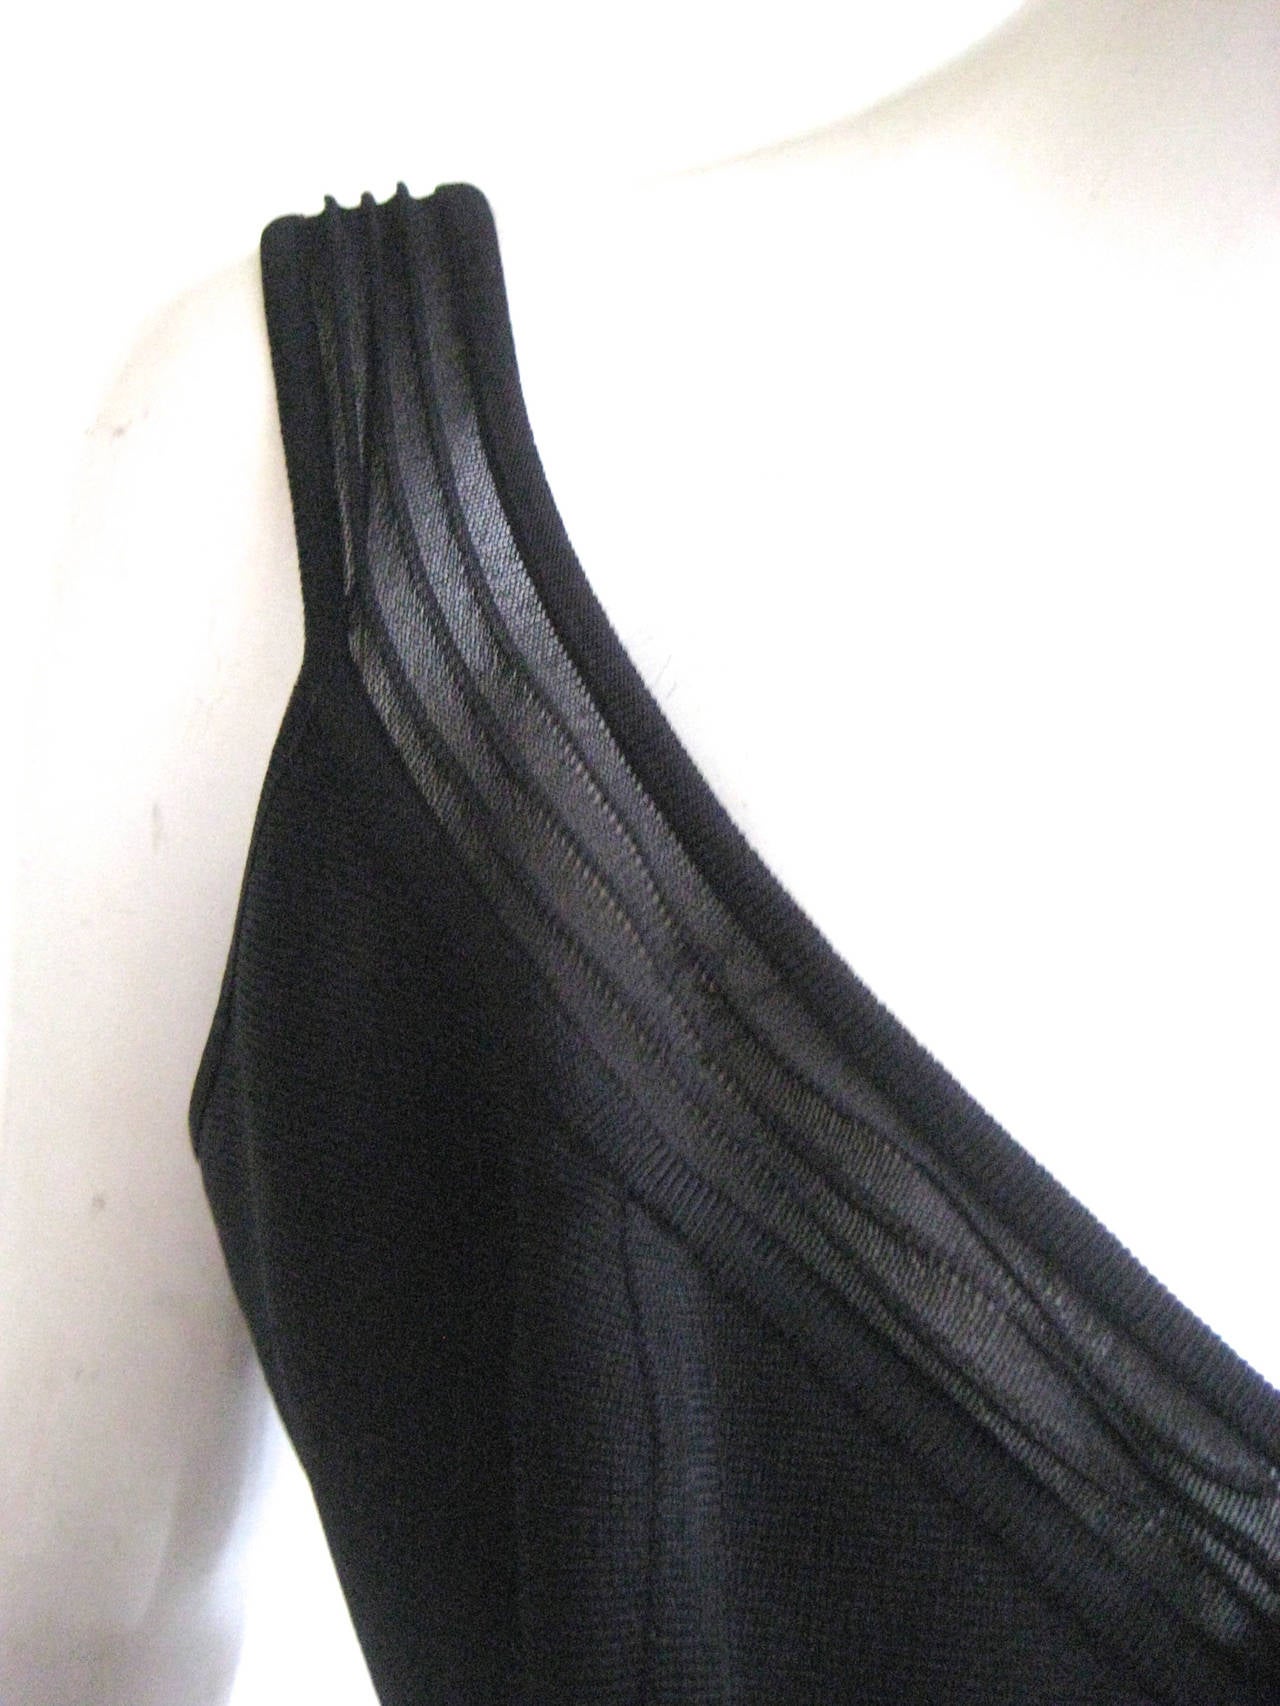 1990s Herve Leger Paris Bandage Crop Top In Excellent Condition For Sale In Chicago, IL